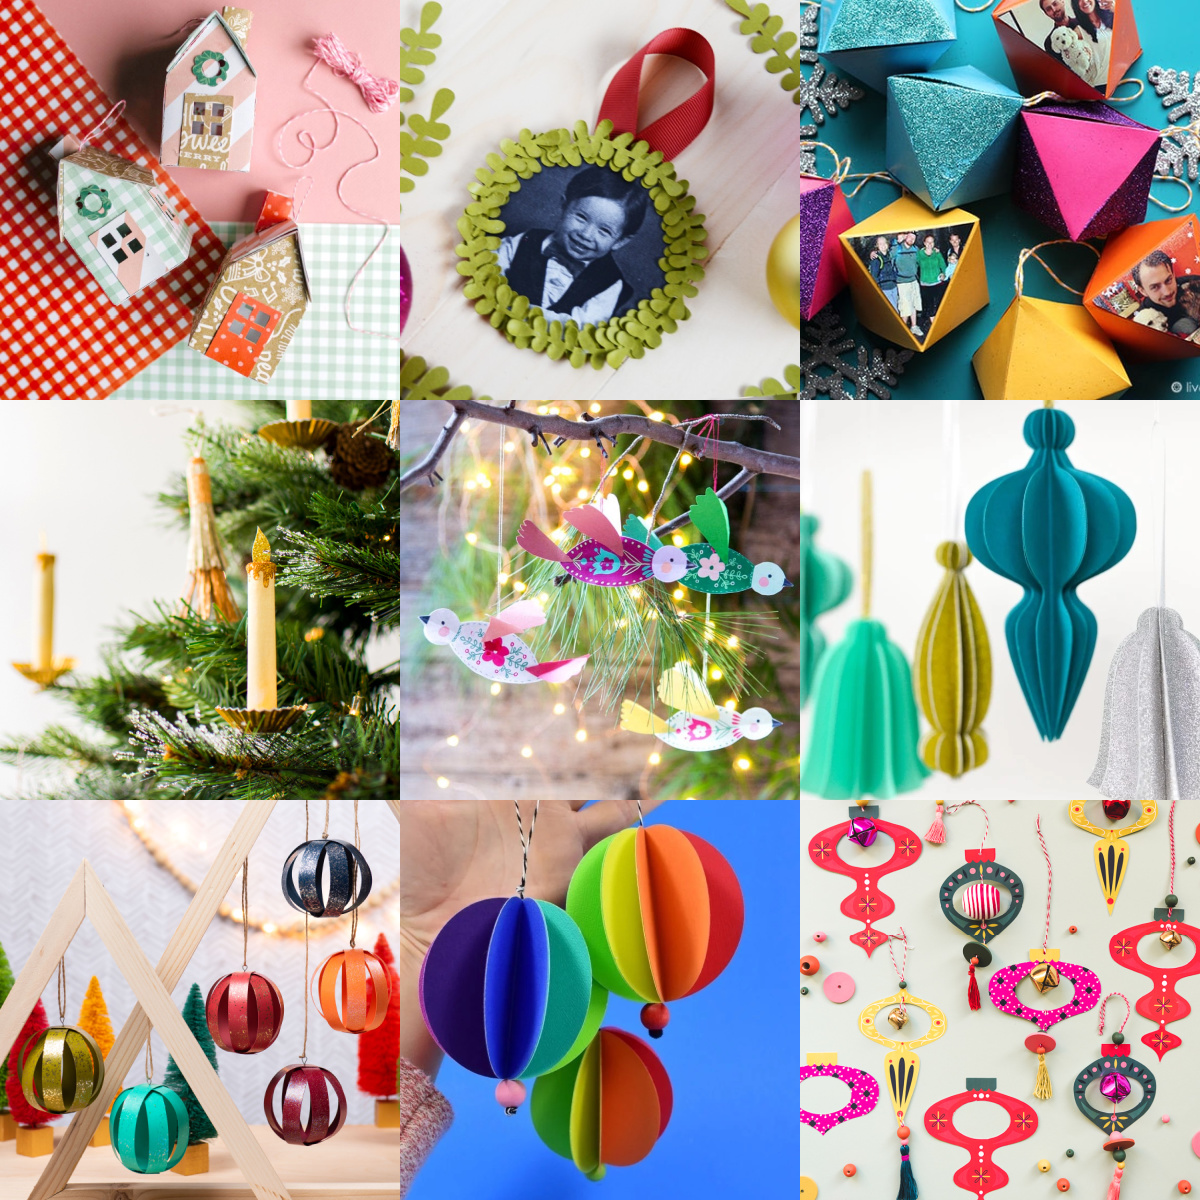 DIY Christmas Ornaments - 50 Insanely Easy-to-Make Decorations